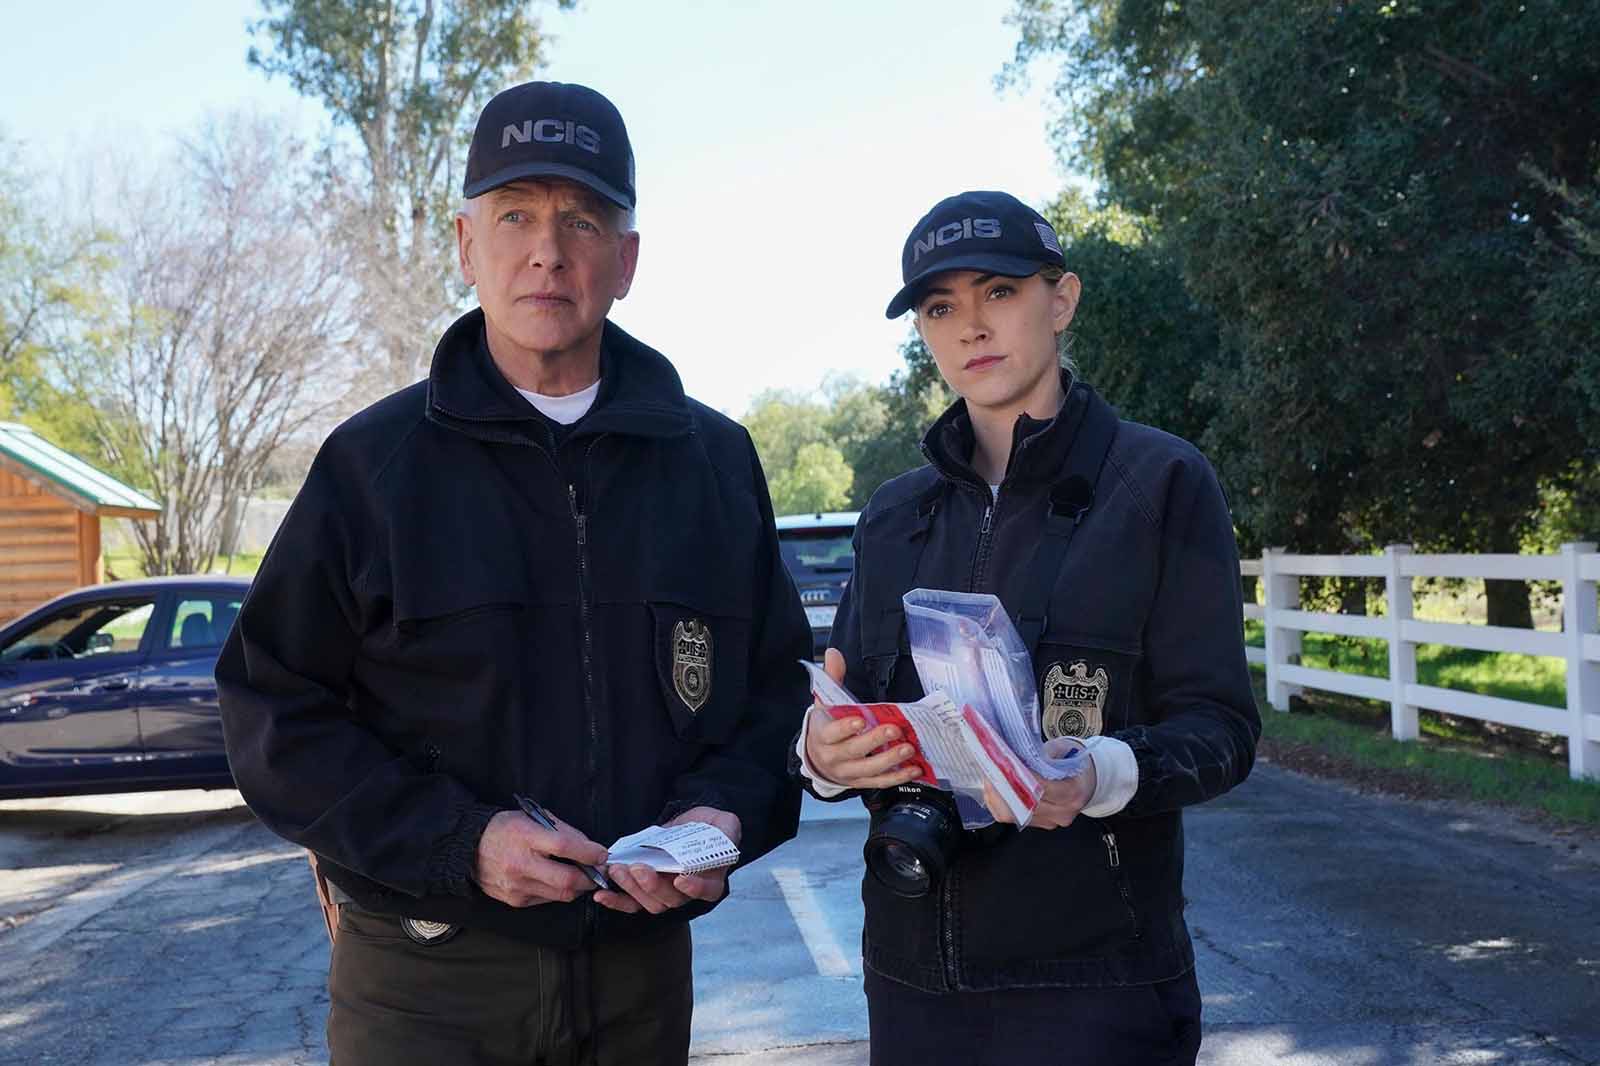 'NCIS' has been topping ratings for years, but the quality has been a slippery slope. After a mediocre season 17, it's time for the crime drama to retire.